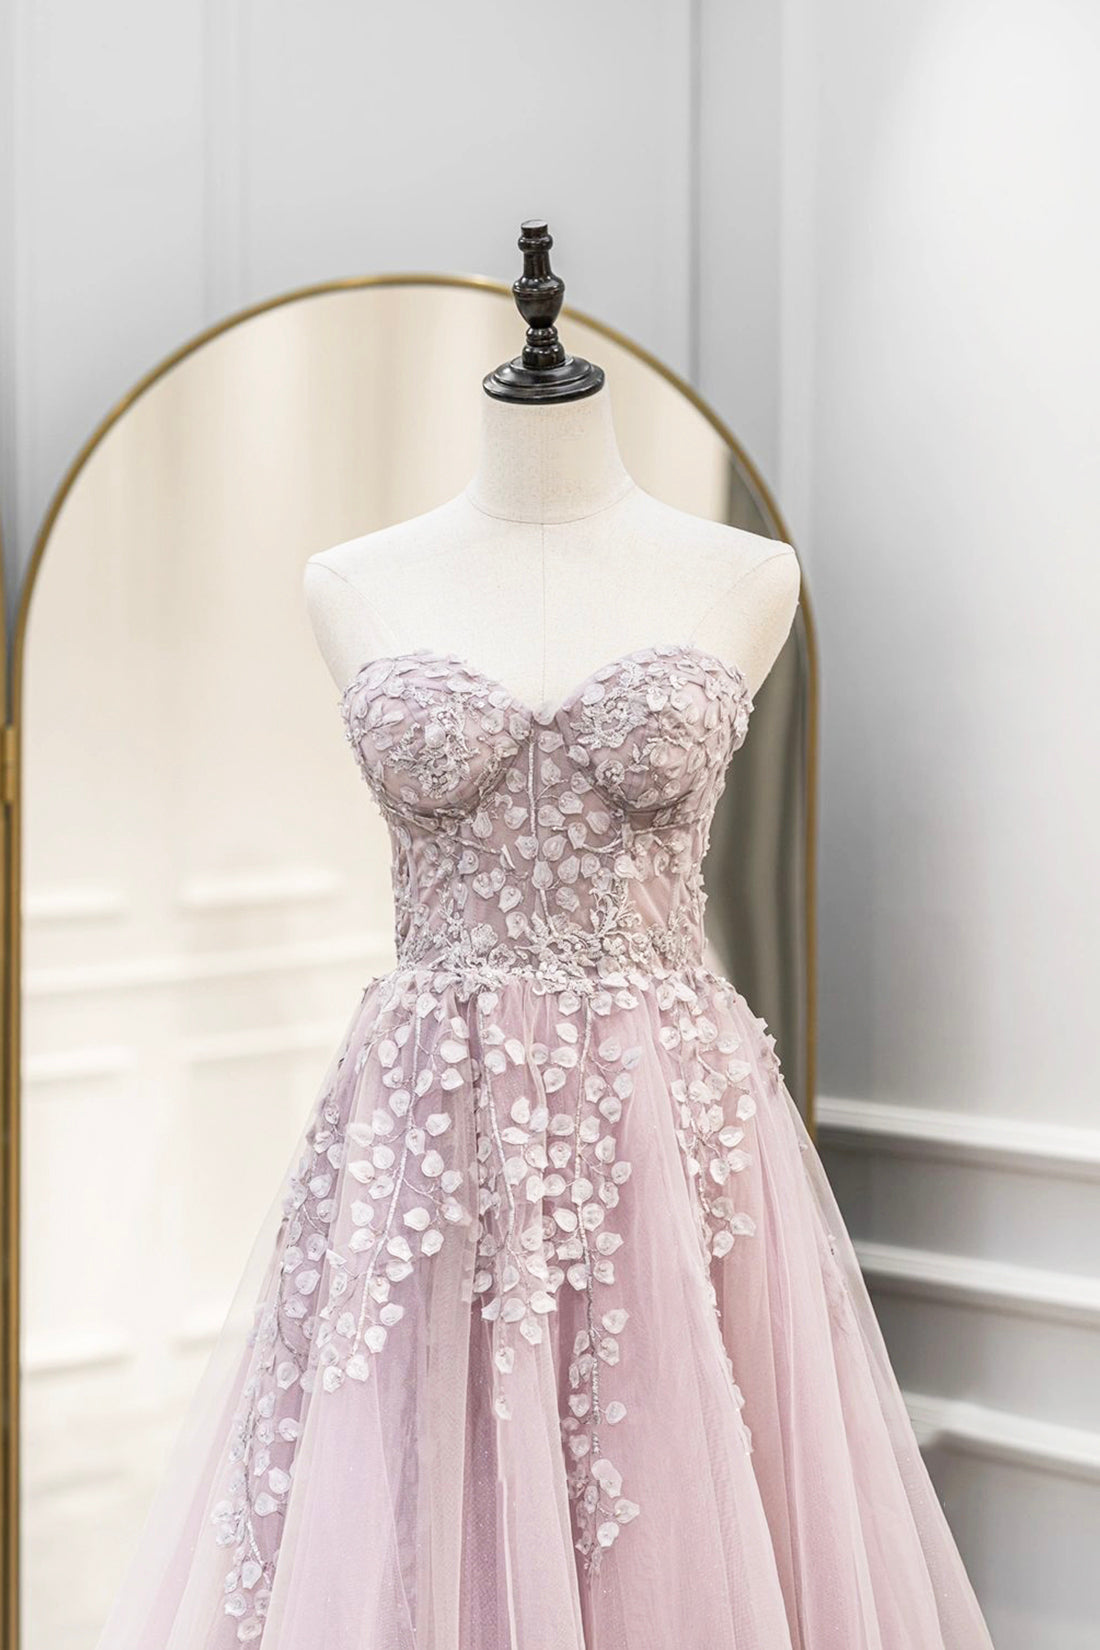 Pink Tulle Sweetheart Long Party Dress, Beautiful A-Line Prom Dress